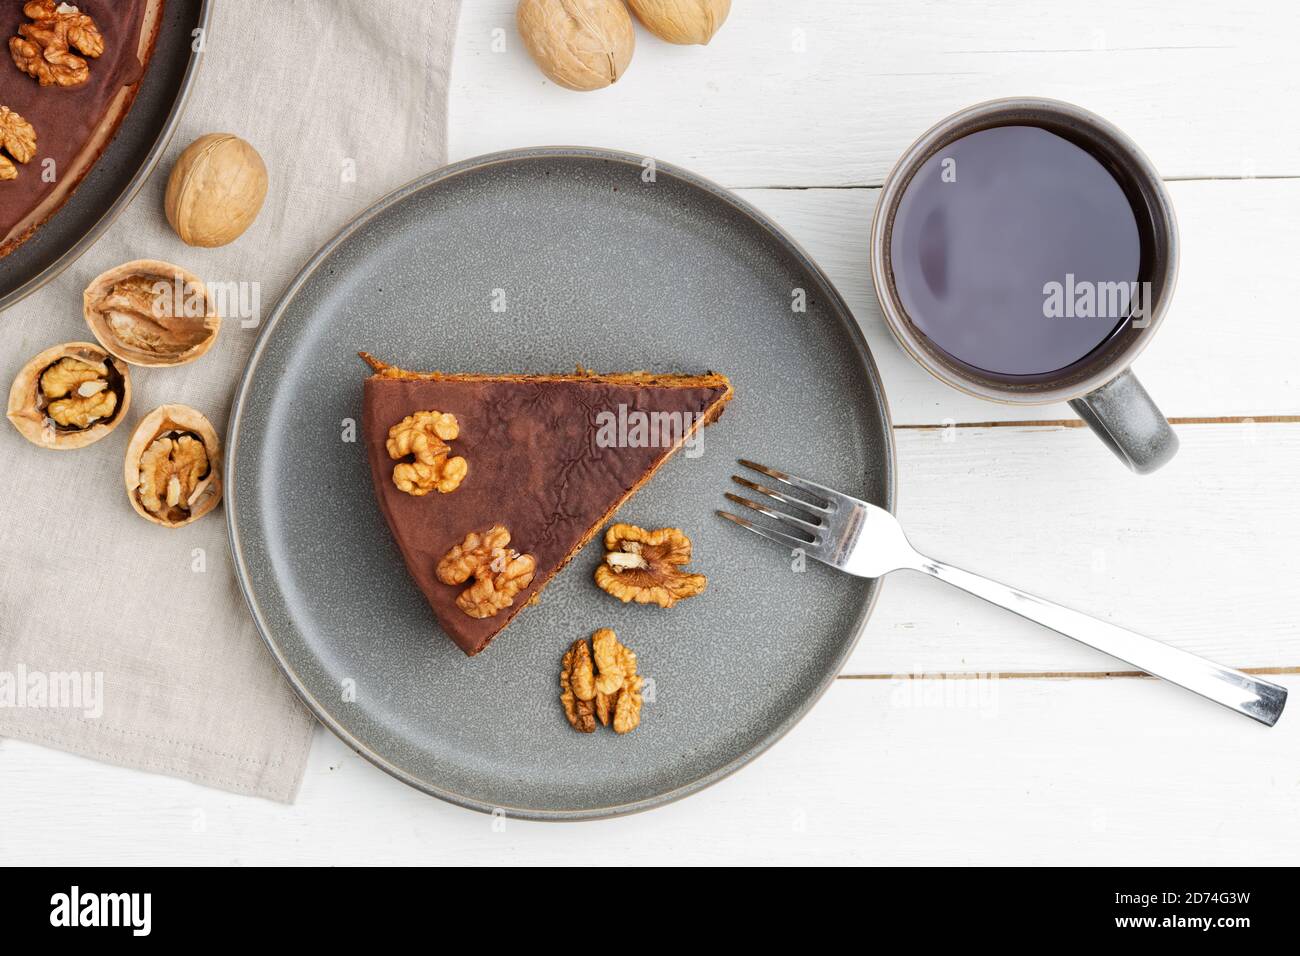 Homemade Walnut Cake with Chocolate Icing and mug of hot tea on white wooden table. Top view. Stock Photo